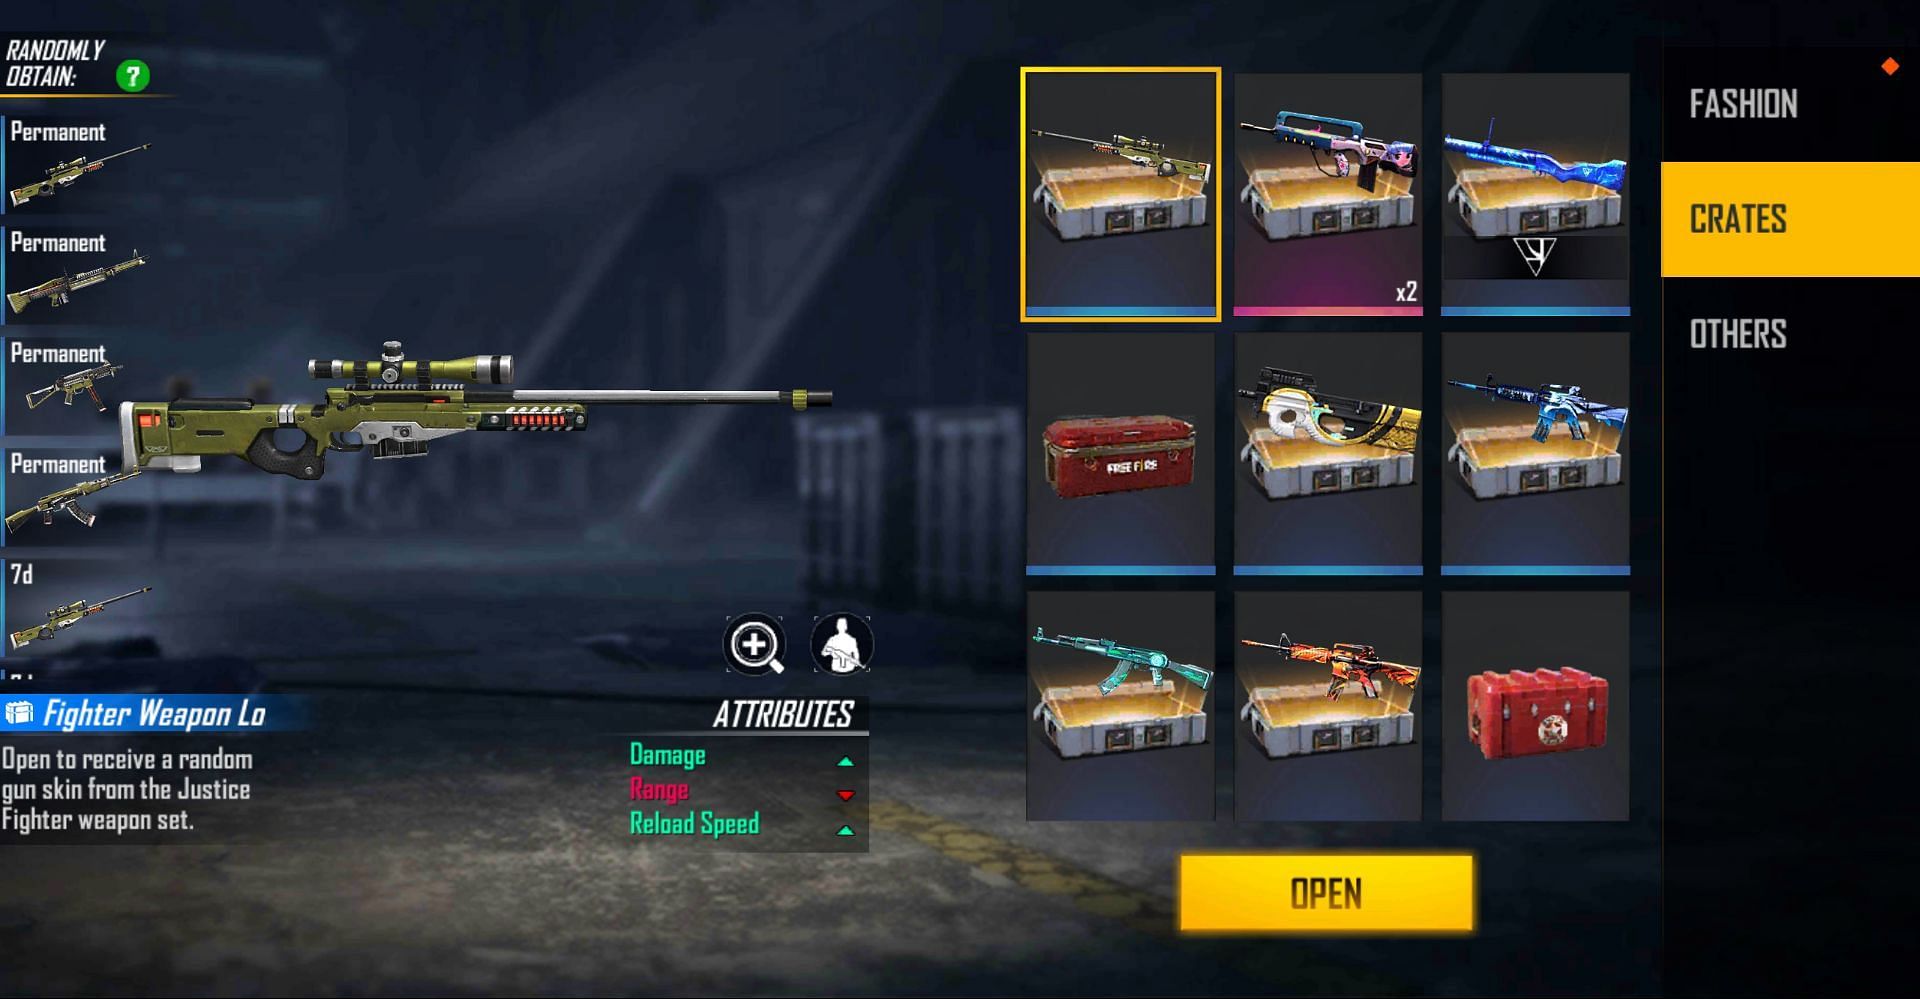 1x Justice Fighter Weapon Loot Crate is also available (Image via Free Fire)